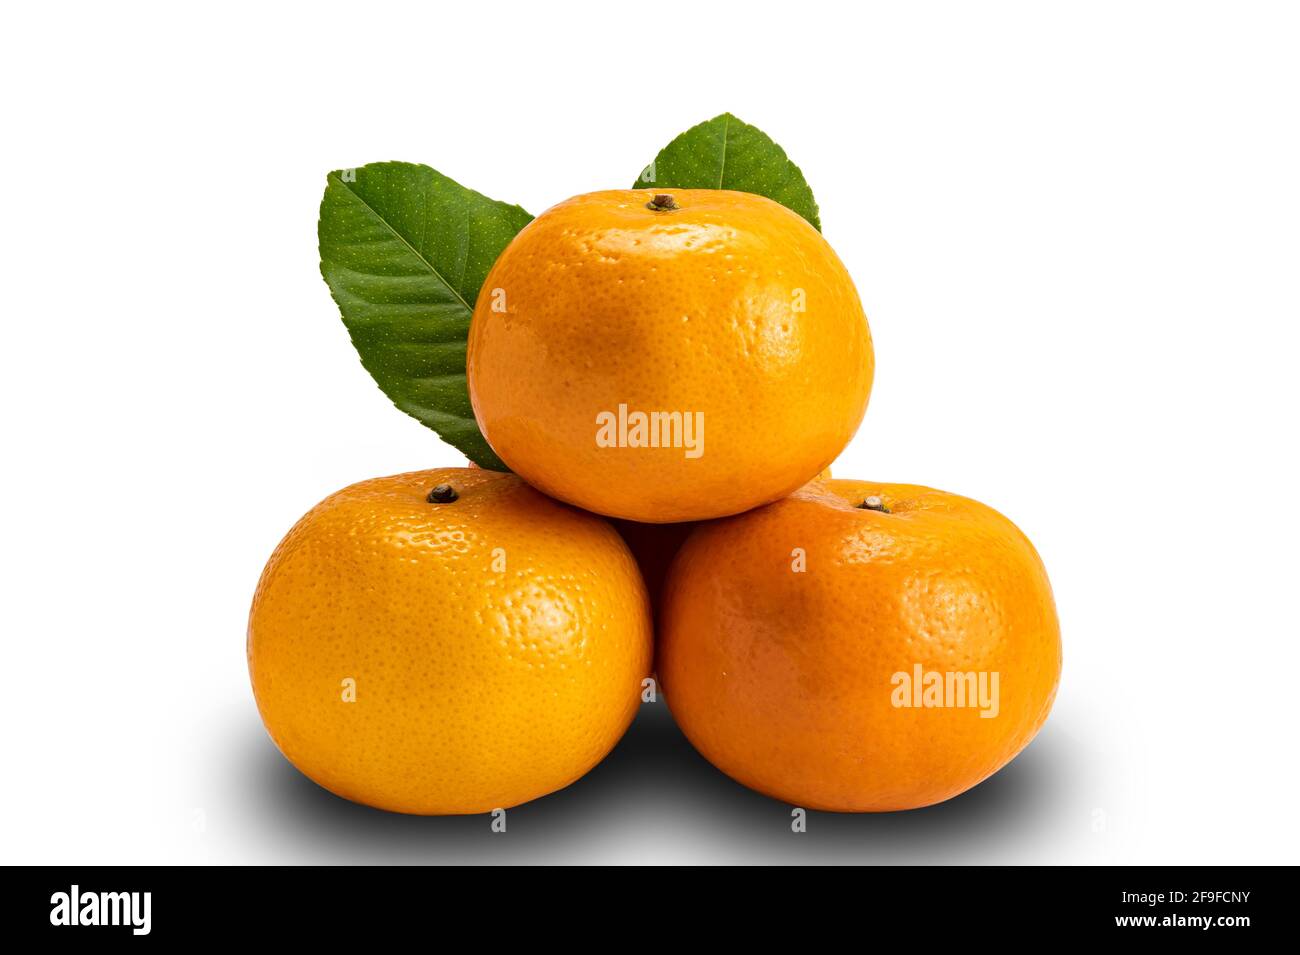 Closeup view of ripe Mandarin oranges with leaves on white background with clipping path. Mandarin orange is sweet, full of fiber and vitamin c. Stock Photo